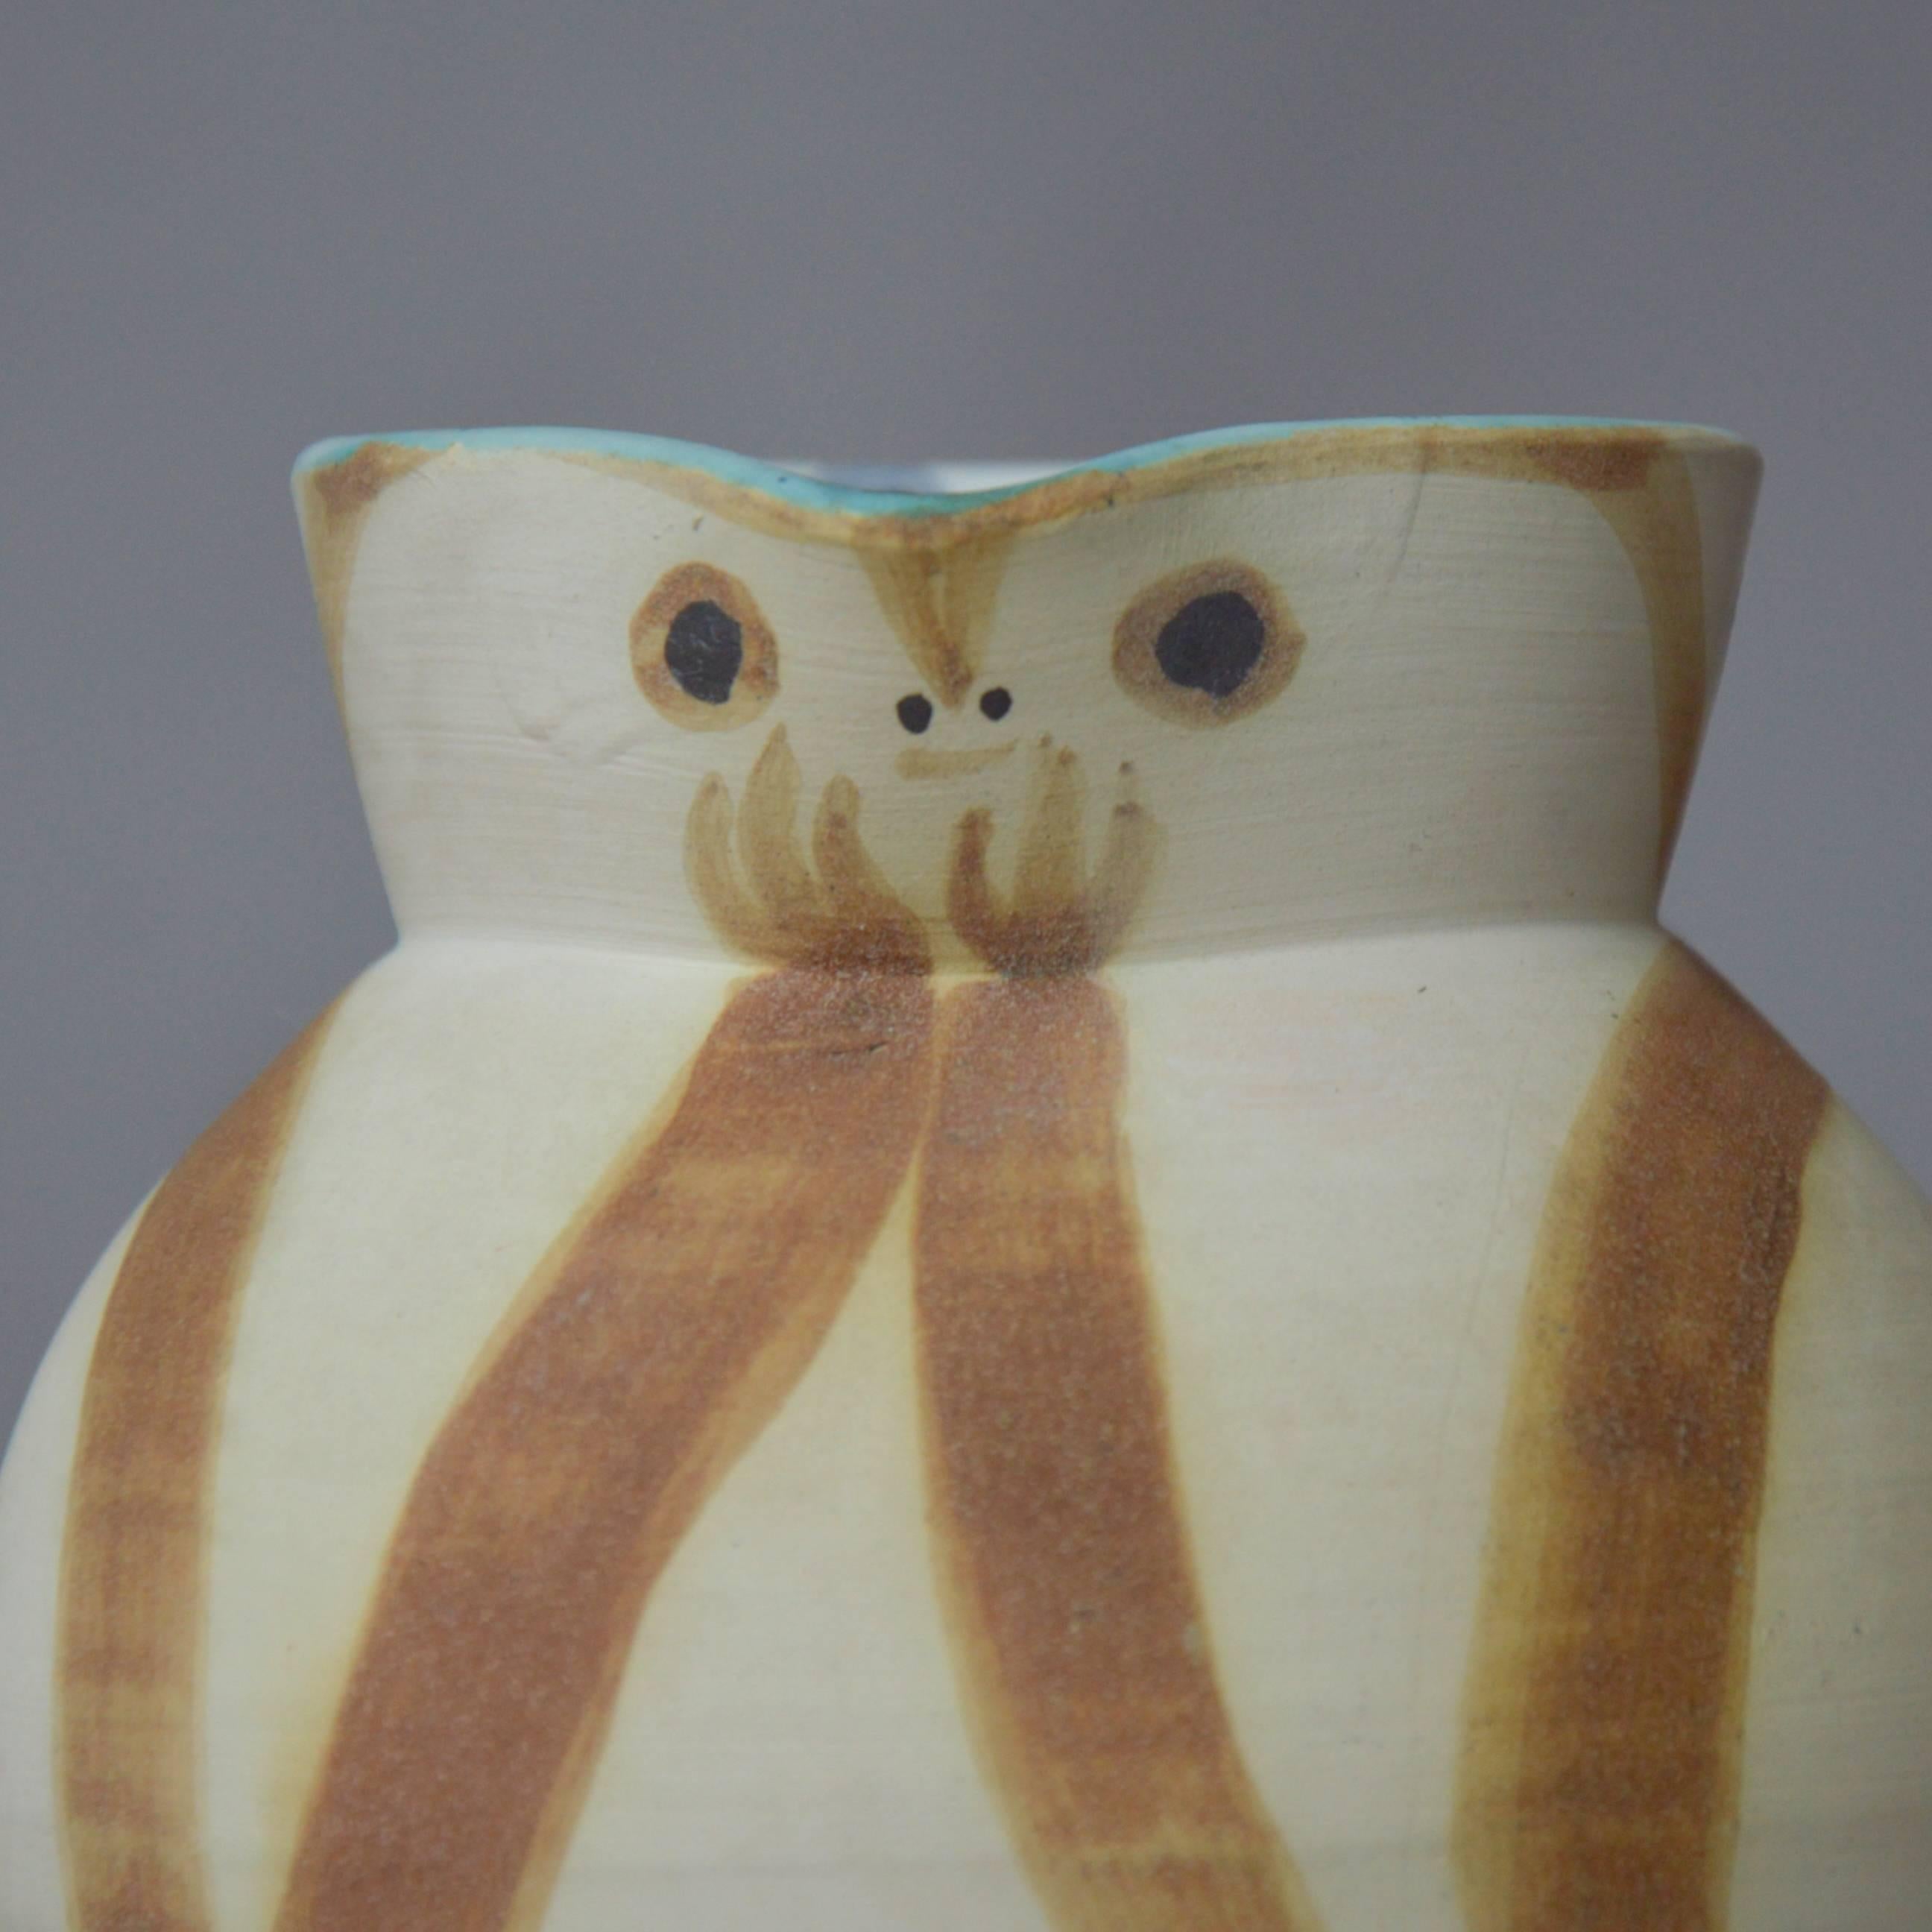 Earthenware Pablo Picasso Madoura Ceramic Pitcher Little Wood-Owl, 1949